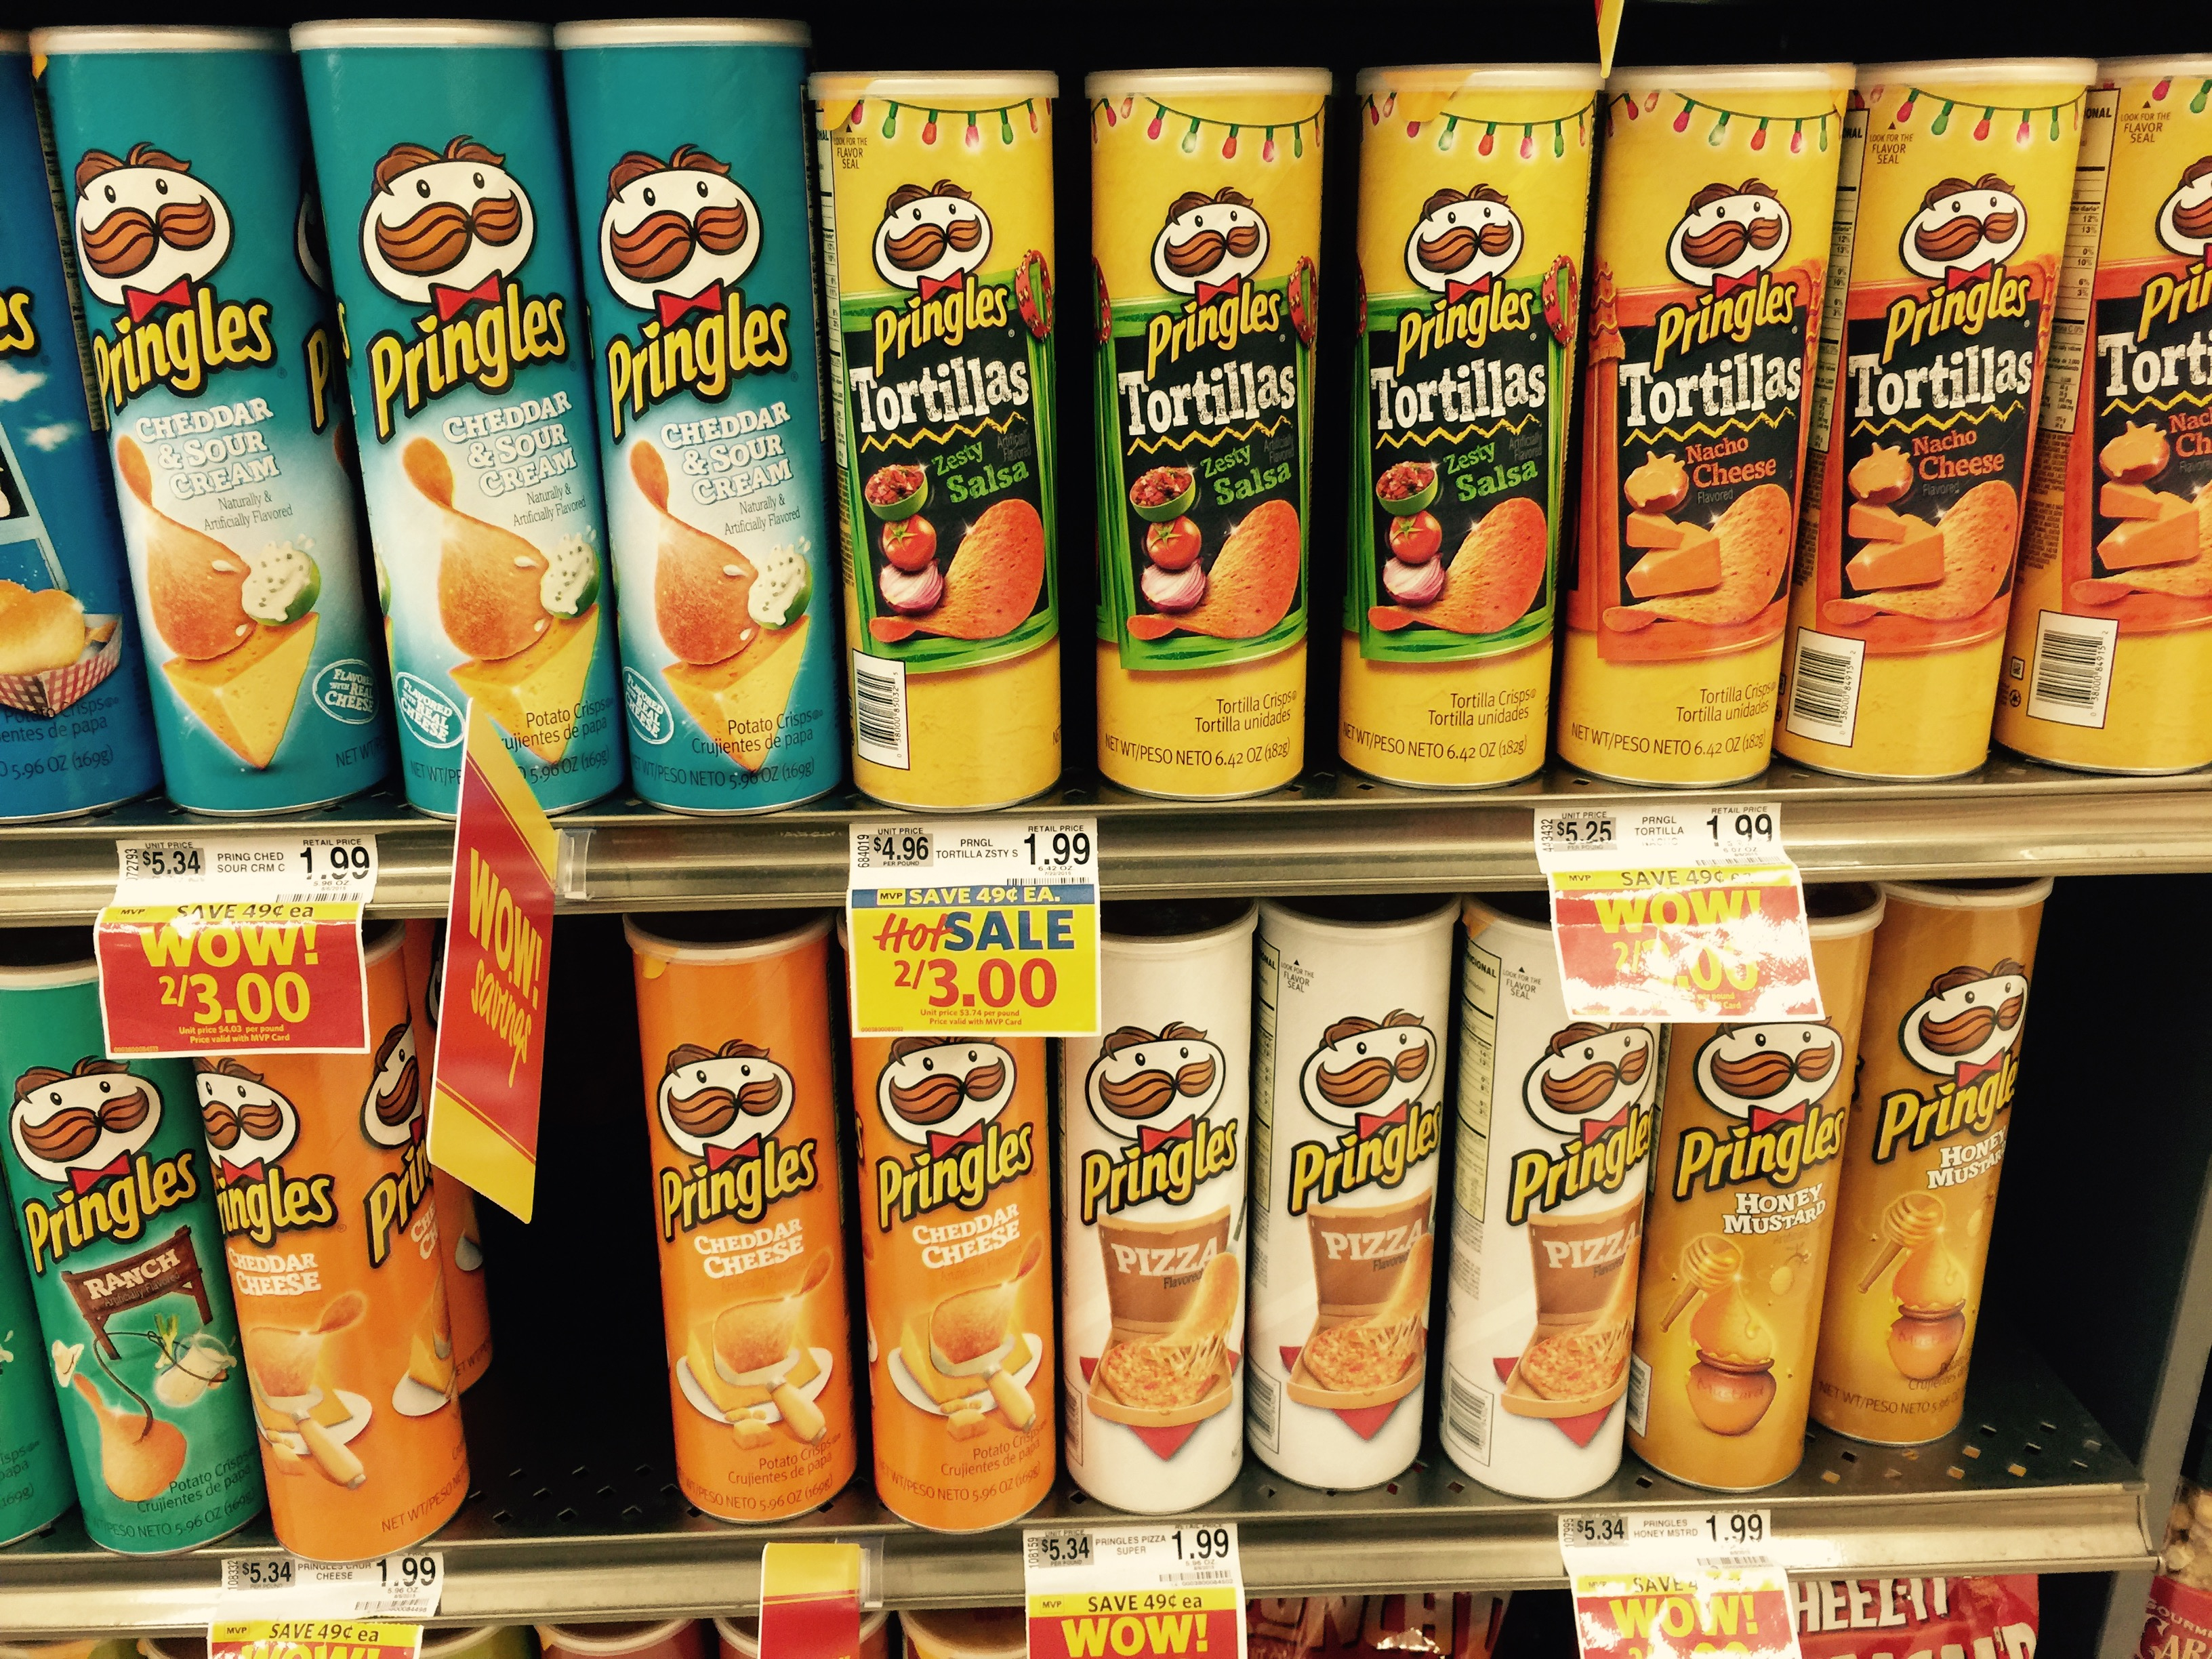 Rare Buy One Get One Free Pringles Coupon - The Harris Teeter Deals - Free Printable Pringles Coupons